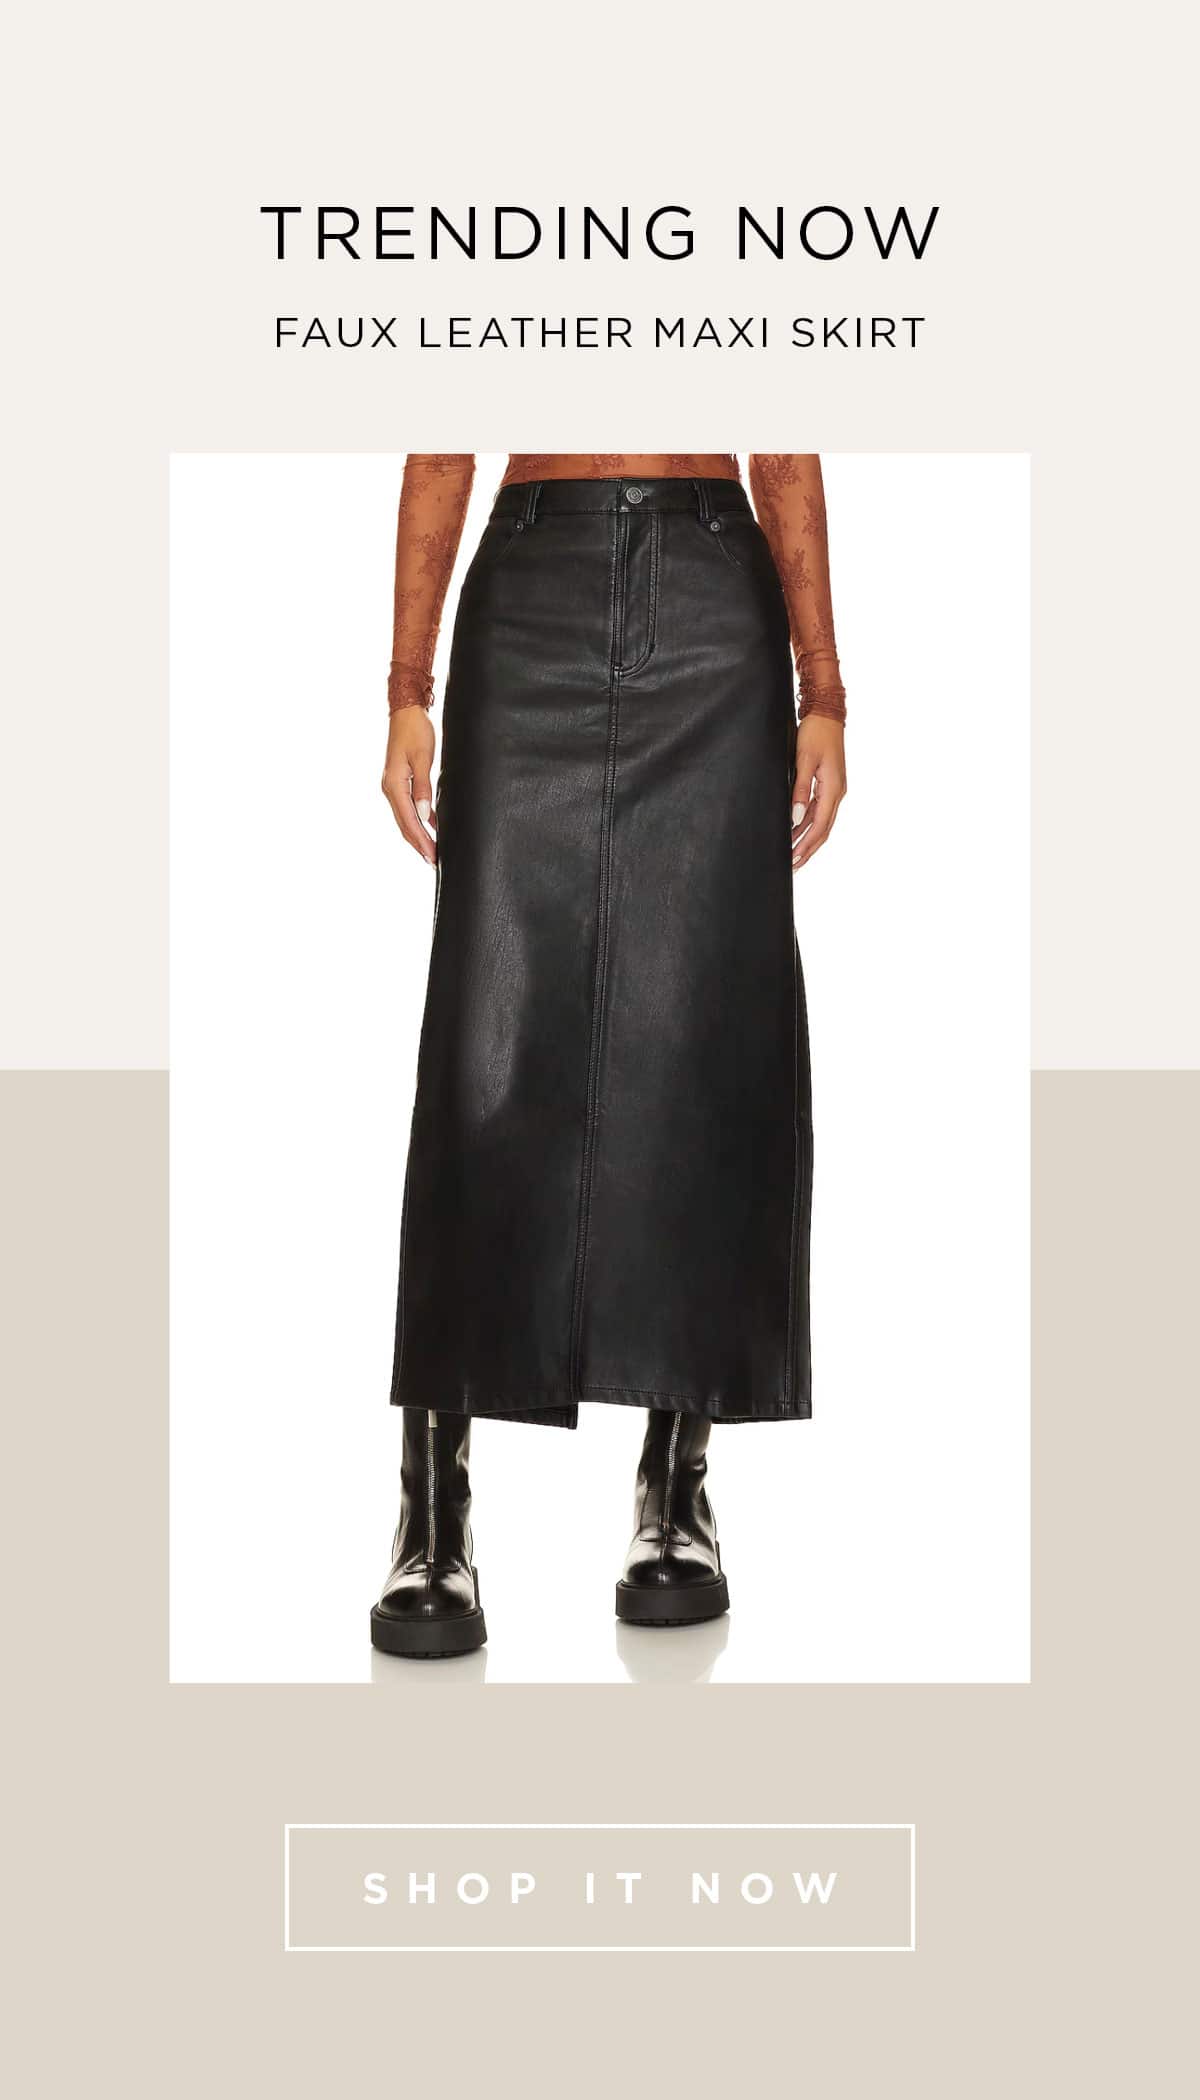 Fall Fashion Trends 2023 Leather is trending for fall! - faux leather maxi skirt